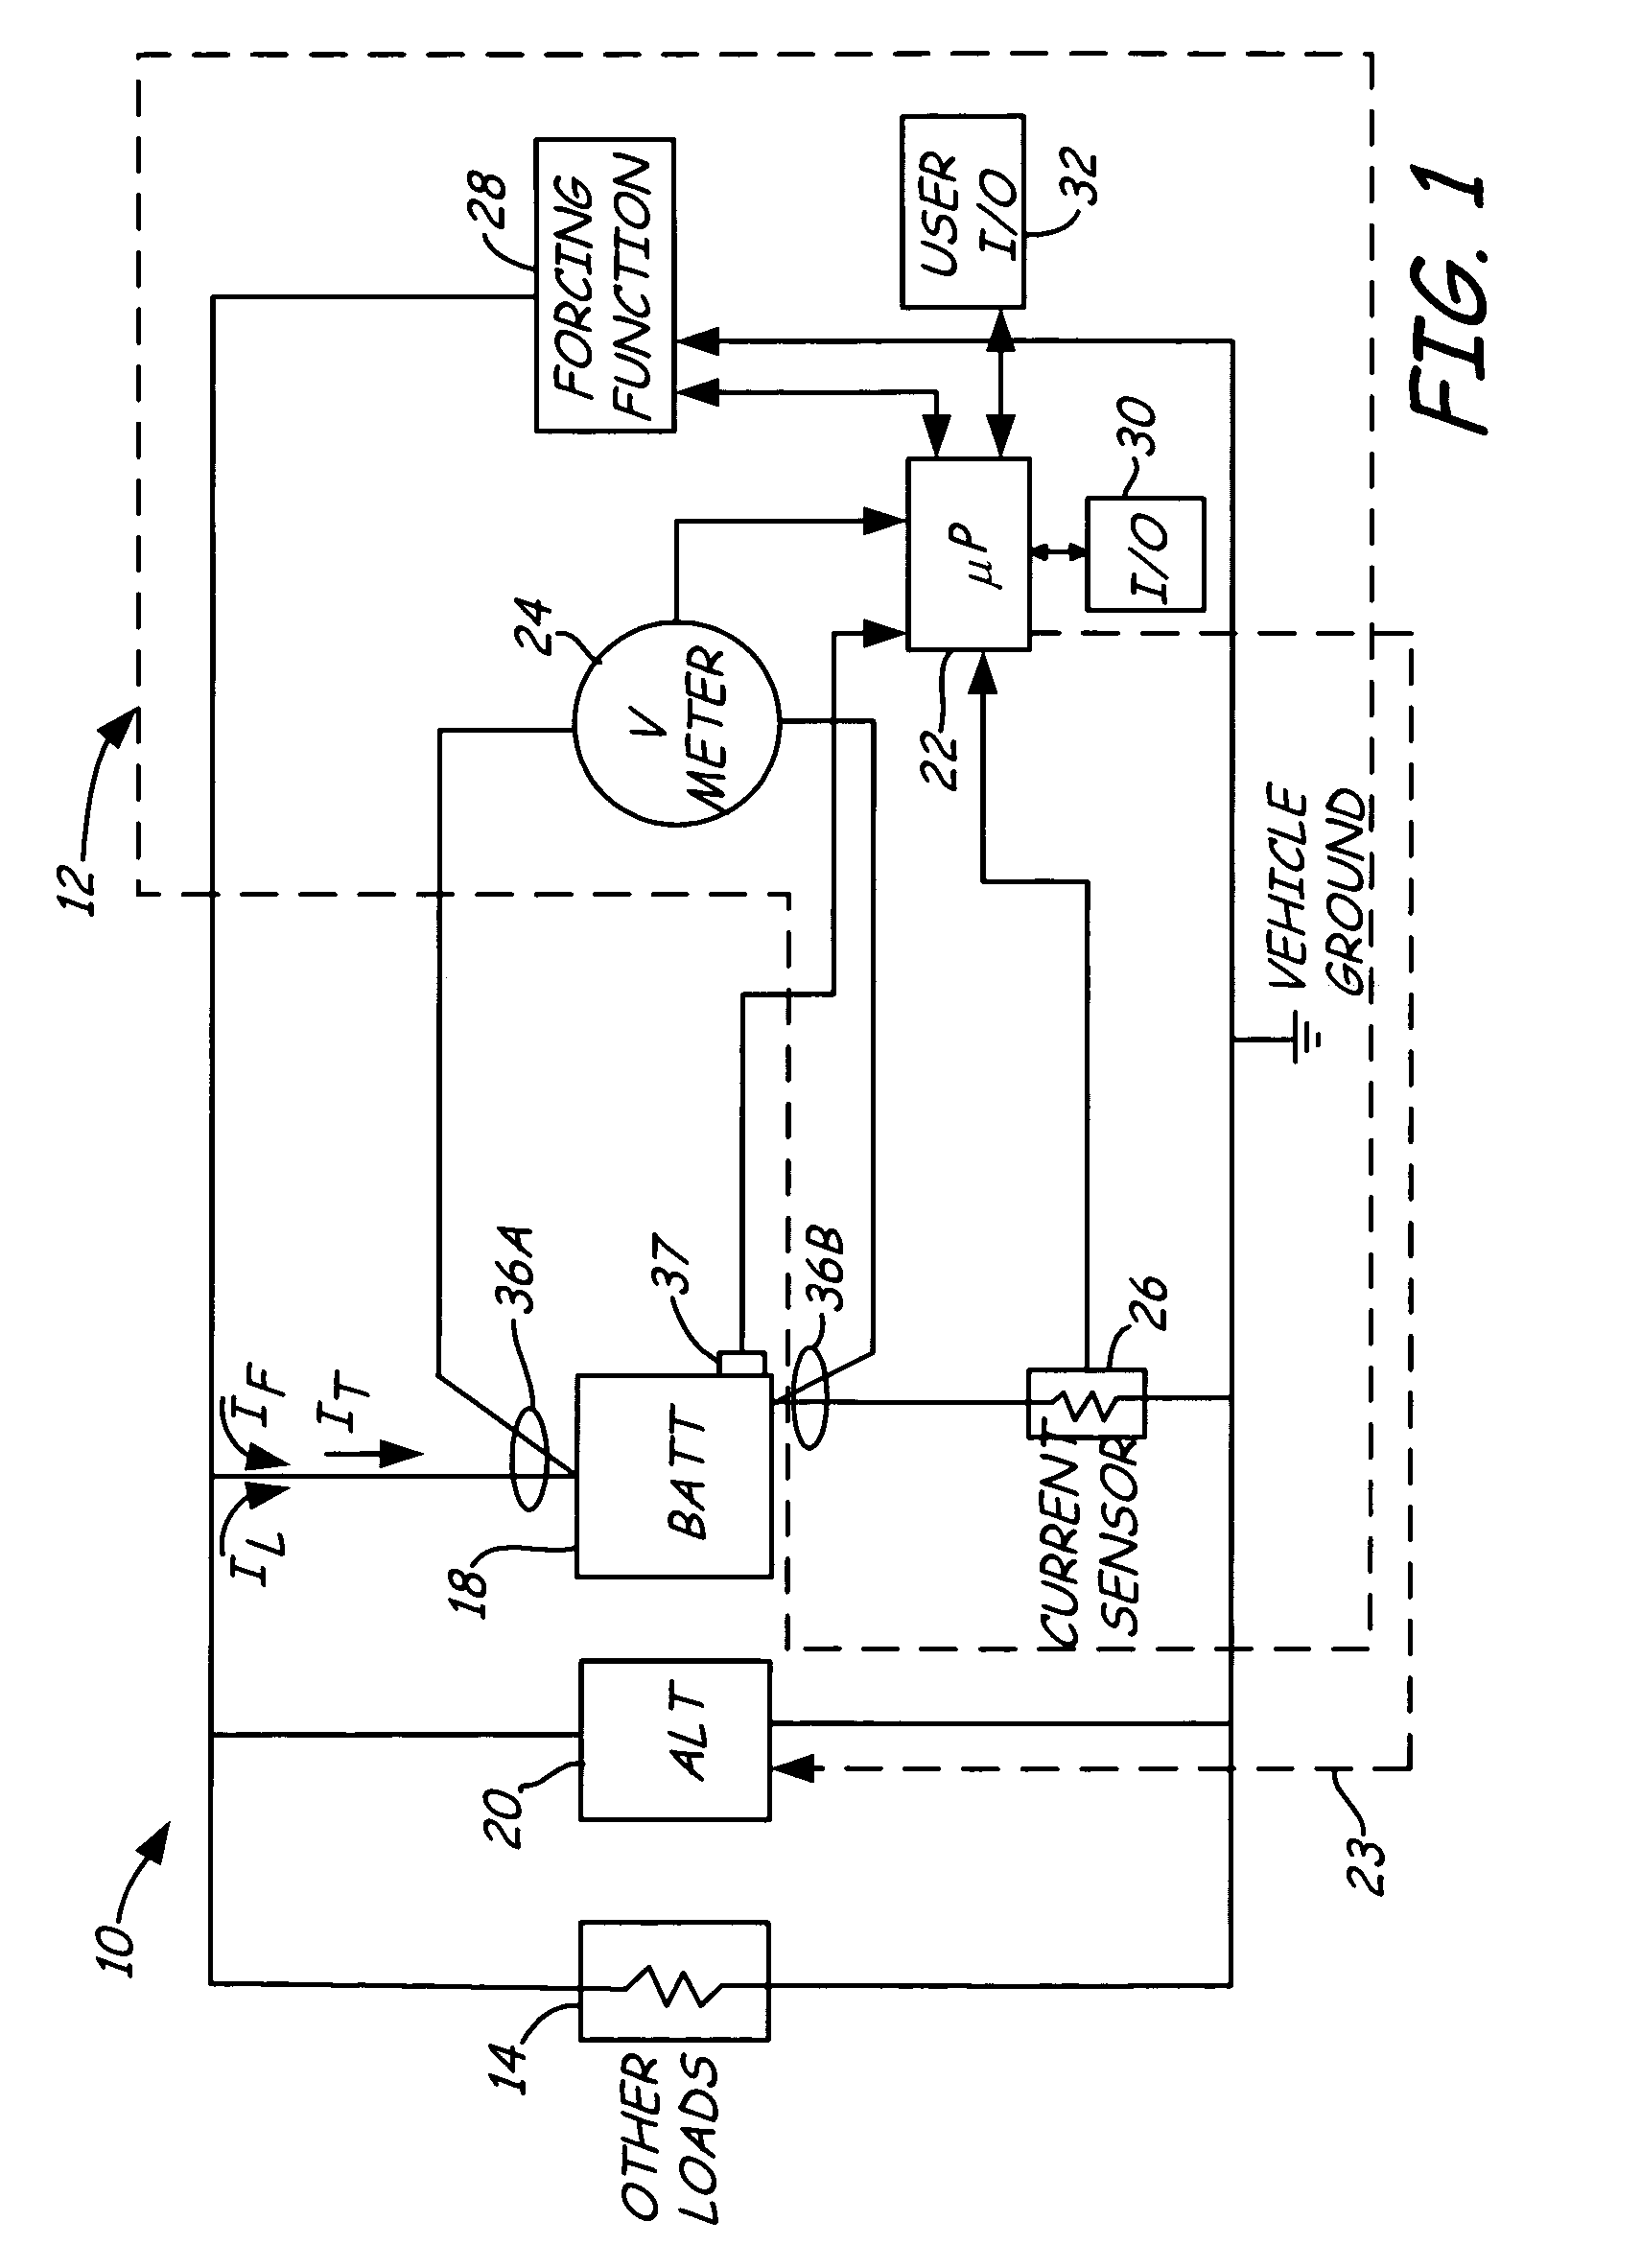 Shunt connection to a PCB of an energy management system employed in an automotive vehicle